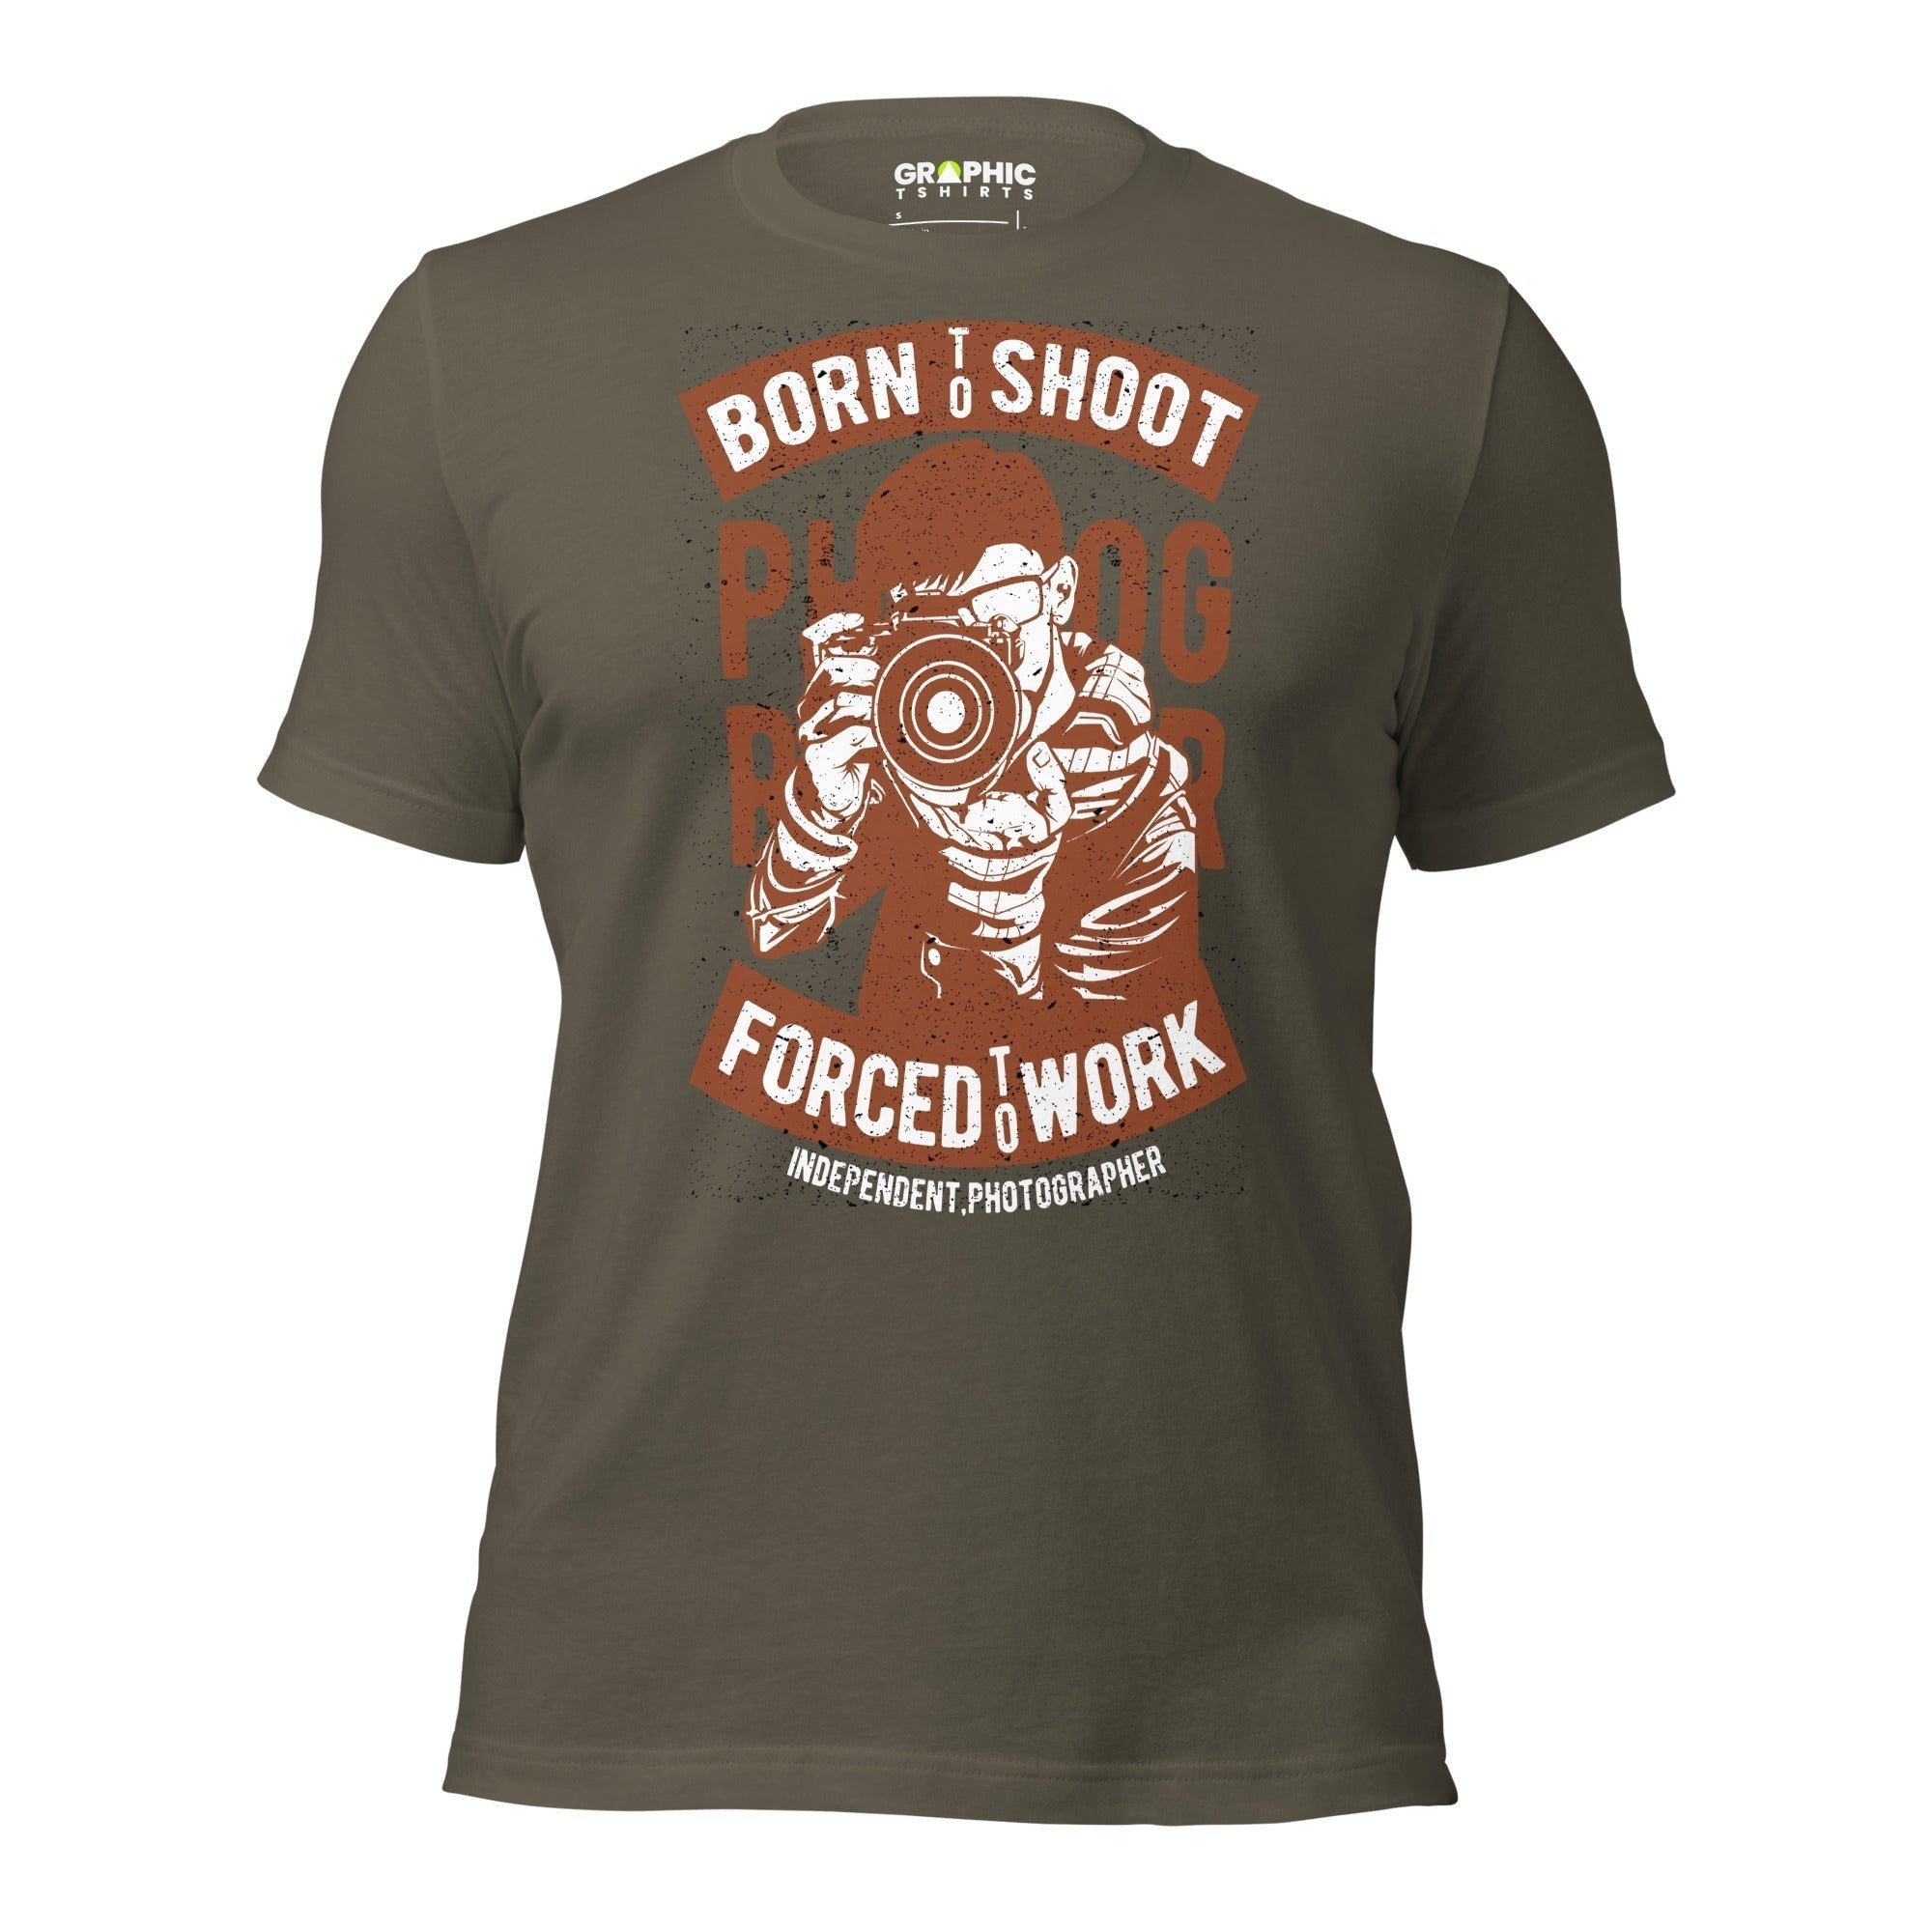 Unisex Staple T-Shirt - Photographer Born To Shoot Forced To Work Independent Photographer - GRAPHIC T-SHIRTS